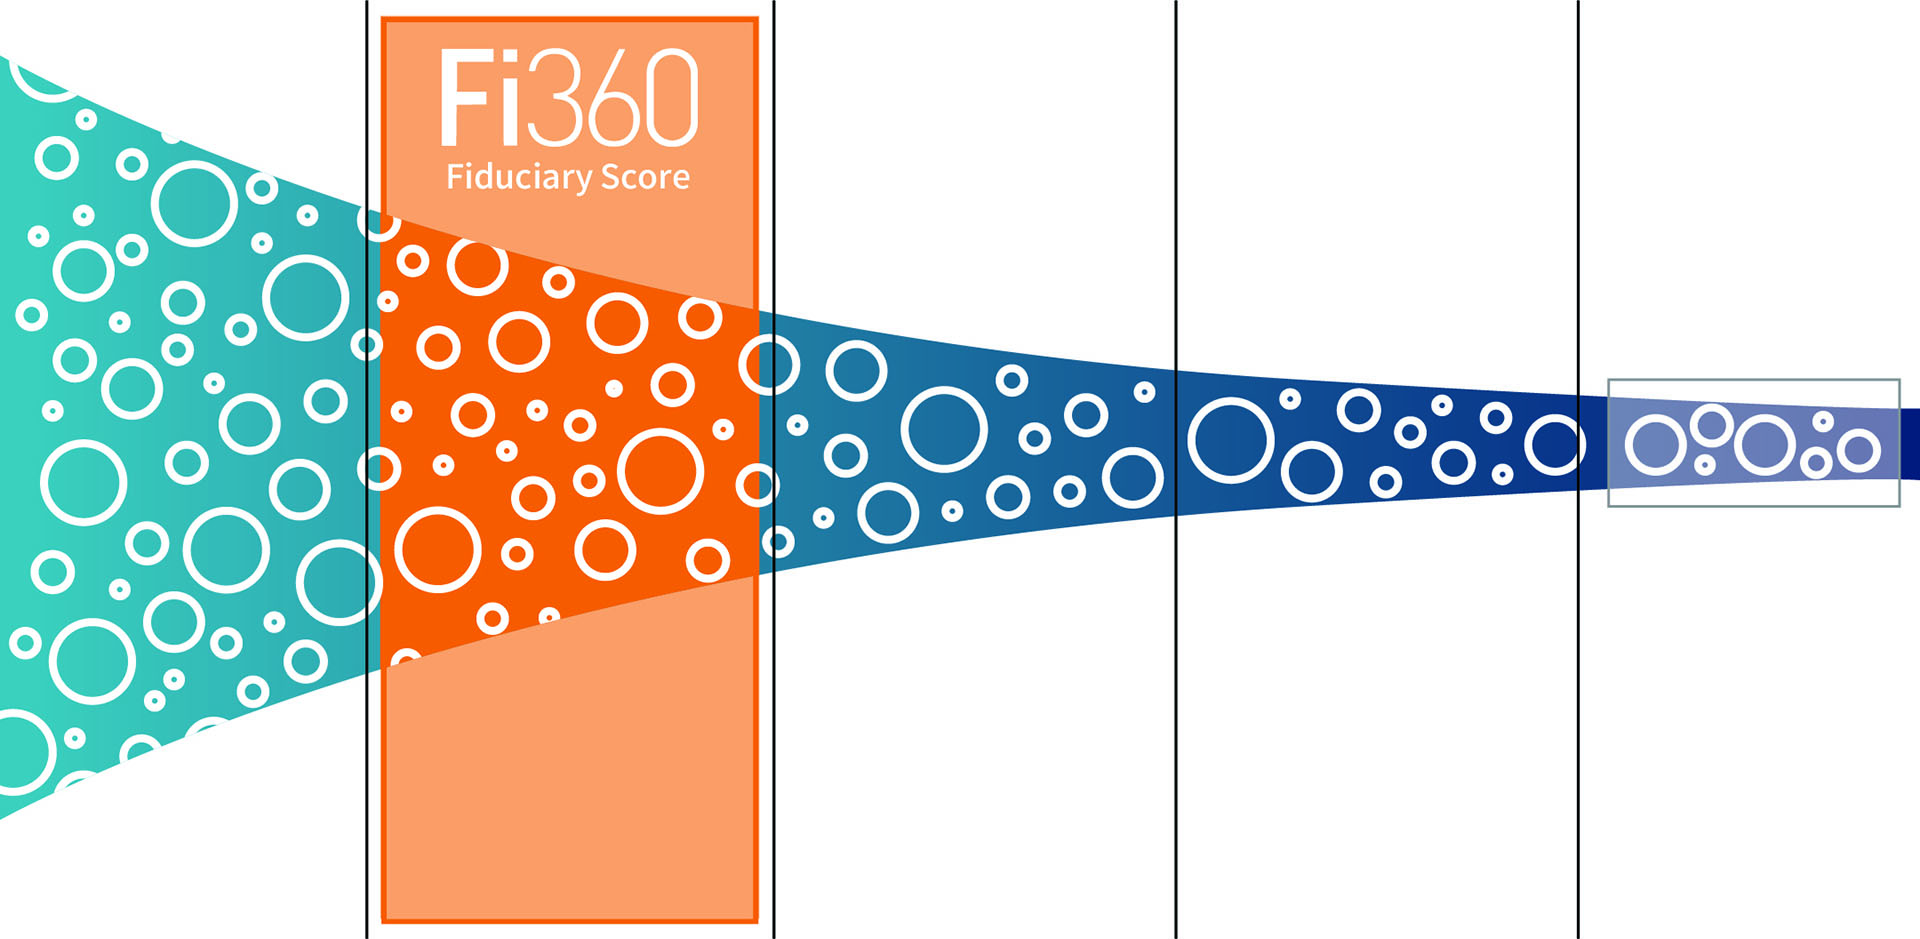 Graphic: A funnel from left to right, gradually condenses into a refined selection of options. The funnel progresses through five stages of refinement. The second stage is highlighted and labeled "Fi360 Fiduciary Score."